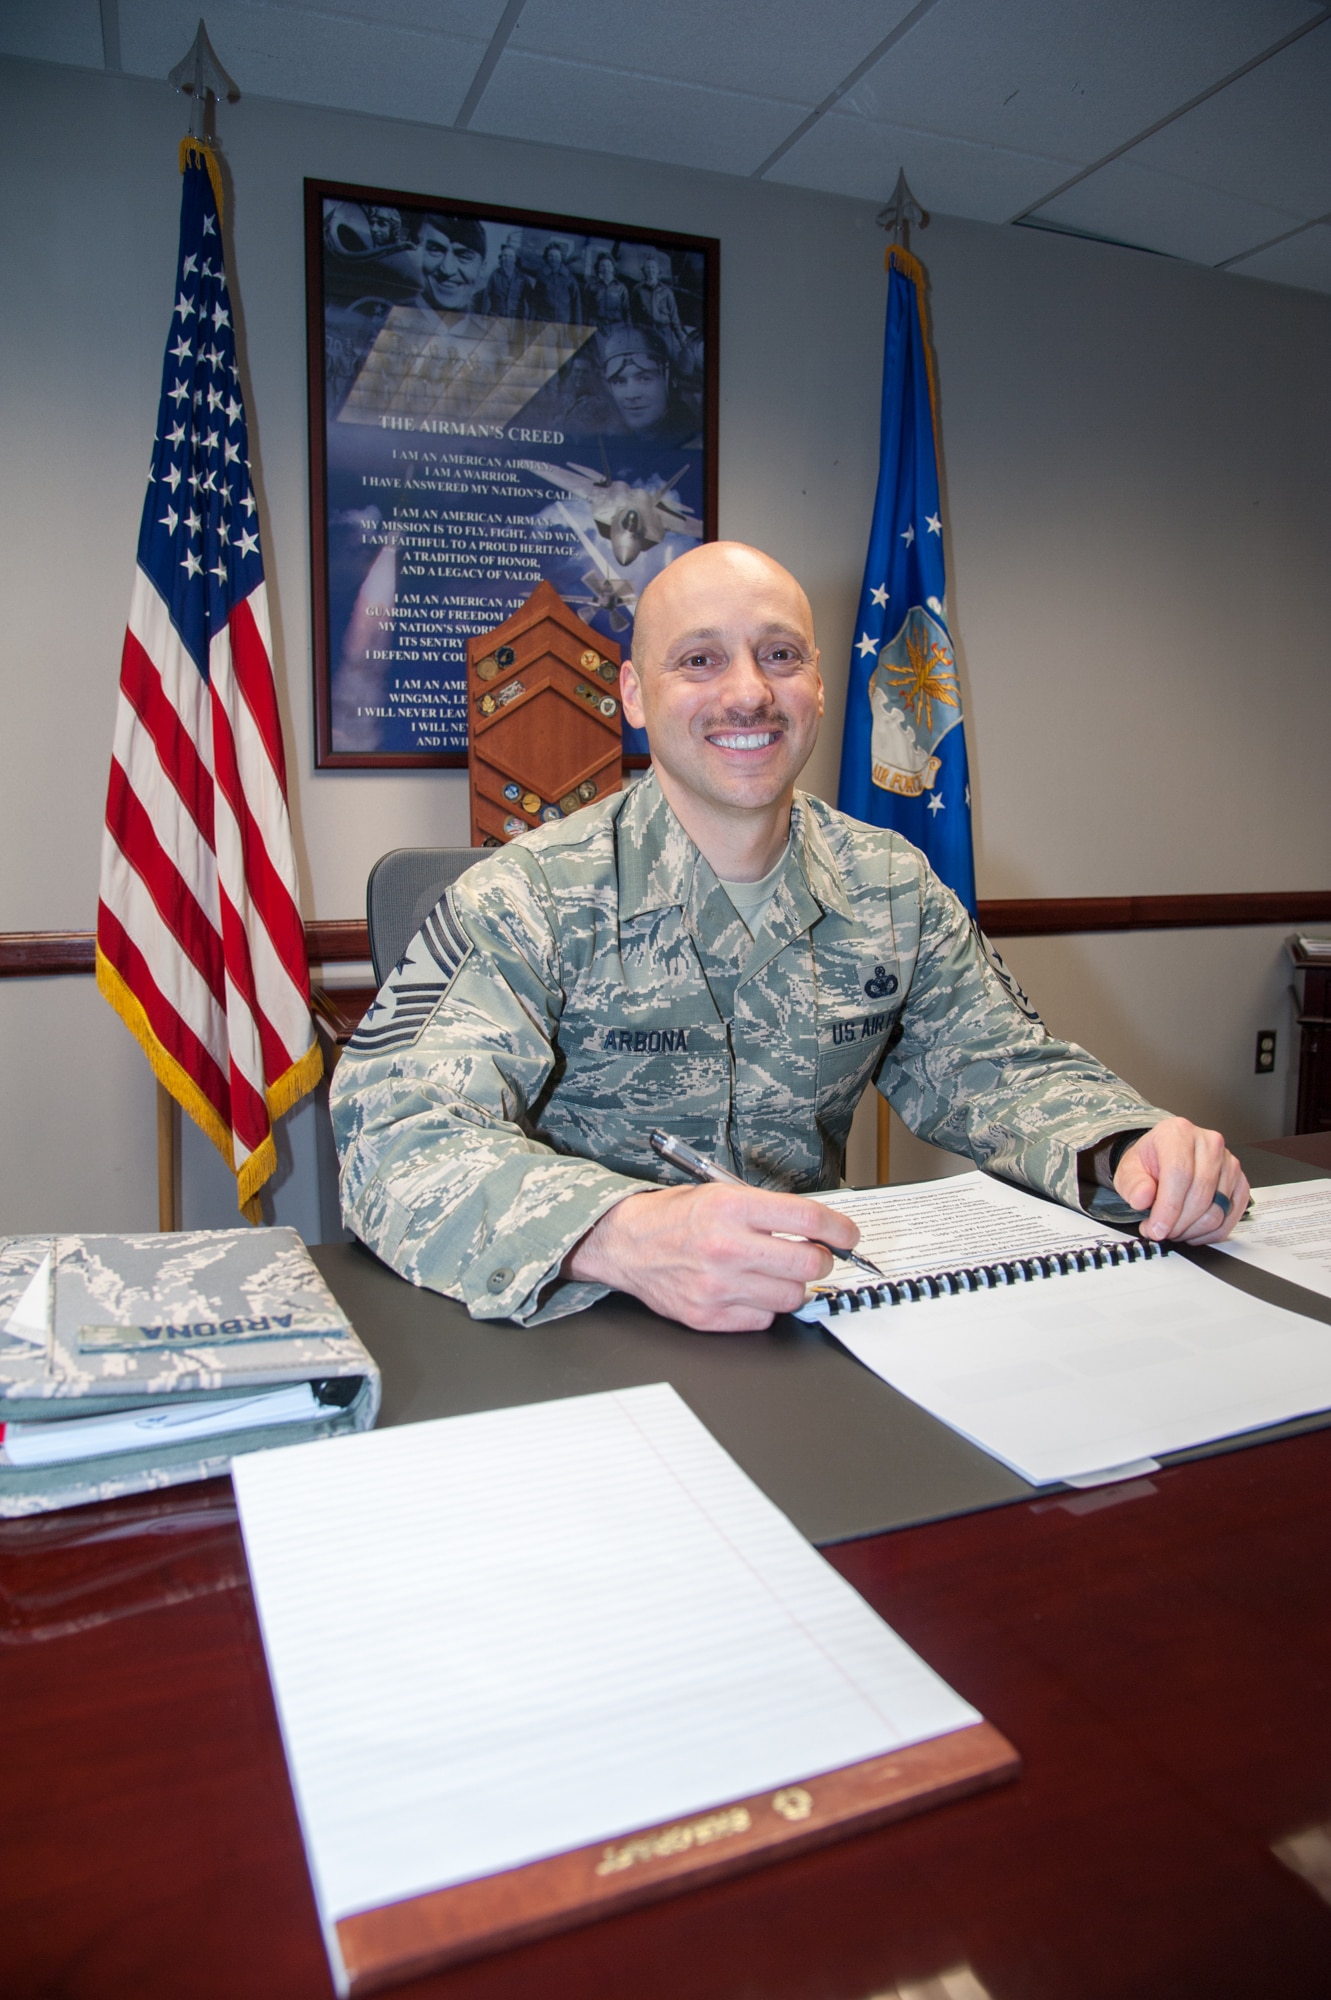 Chief Master Sgt. Stephen A. Arbona serves as the command chief master sergeant for the Air Force Materiel Command's 88th Air Base Wing, Wright-Patterson Air Force Base, Ohio. His first day on the job was May 16. (U.S. Air Force photo/John Harrington)